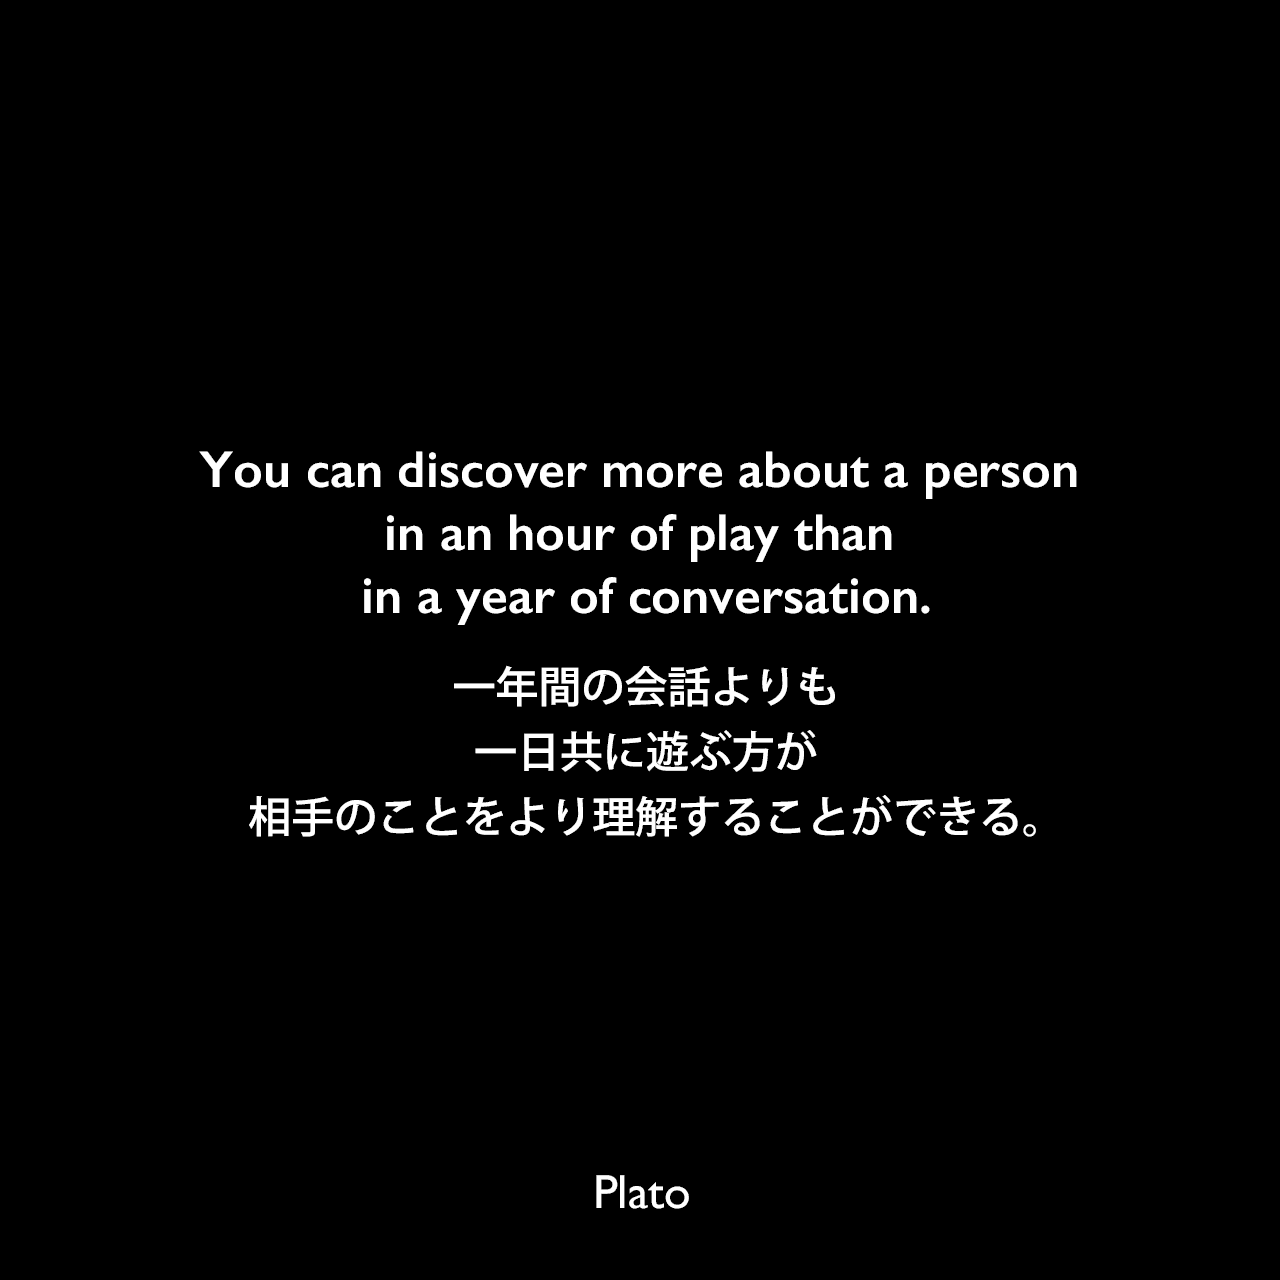 You can discover more about a person in an hour of play than in a year of conversation.一年間の会話よりも、一日共に遊ぶ方が相手のことをより理解することができる。Plato